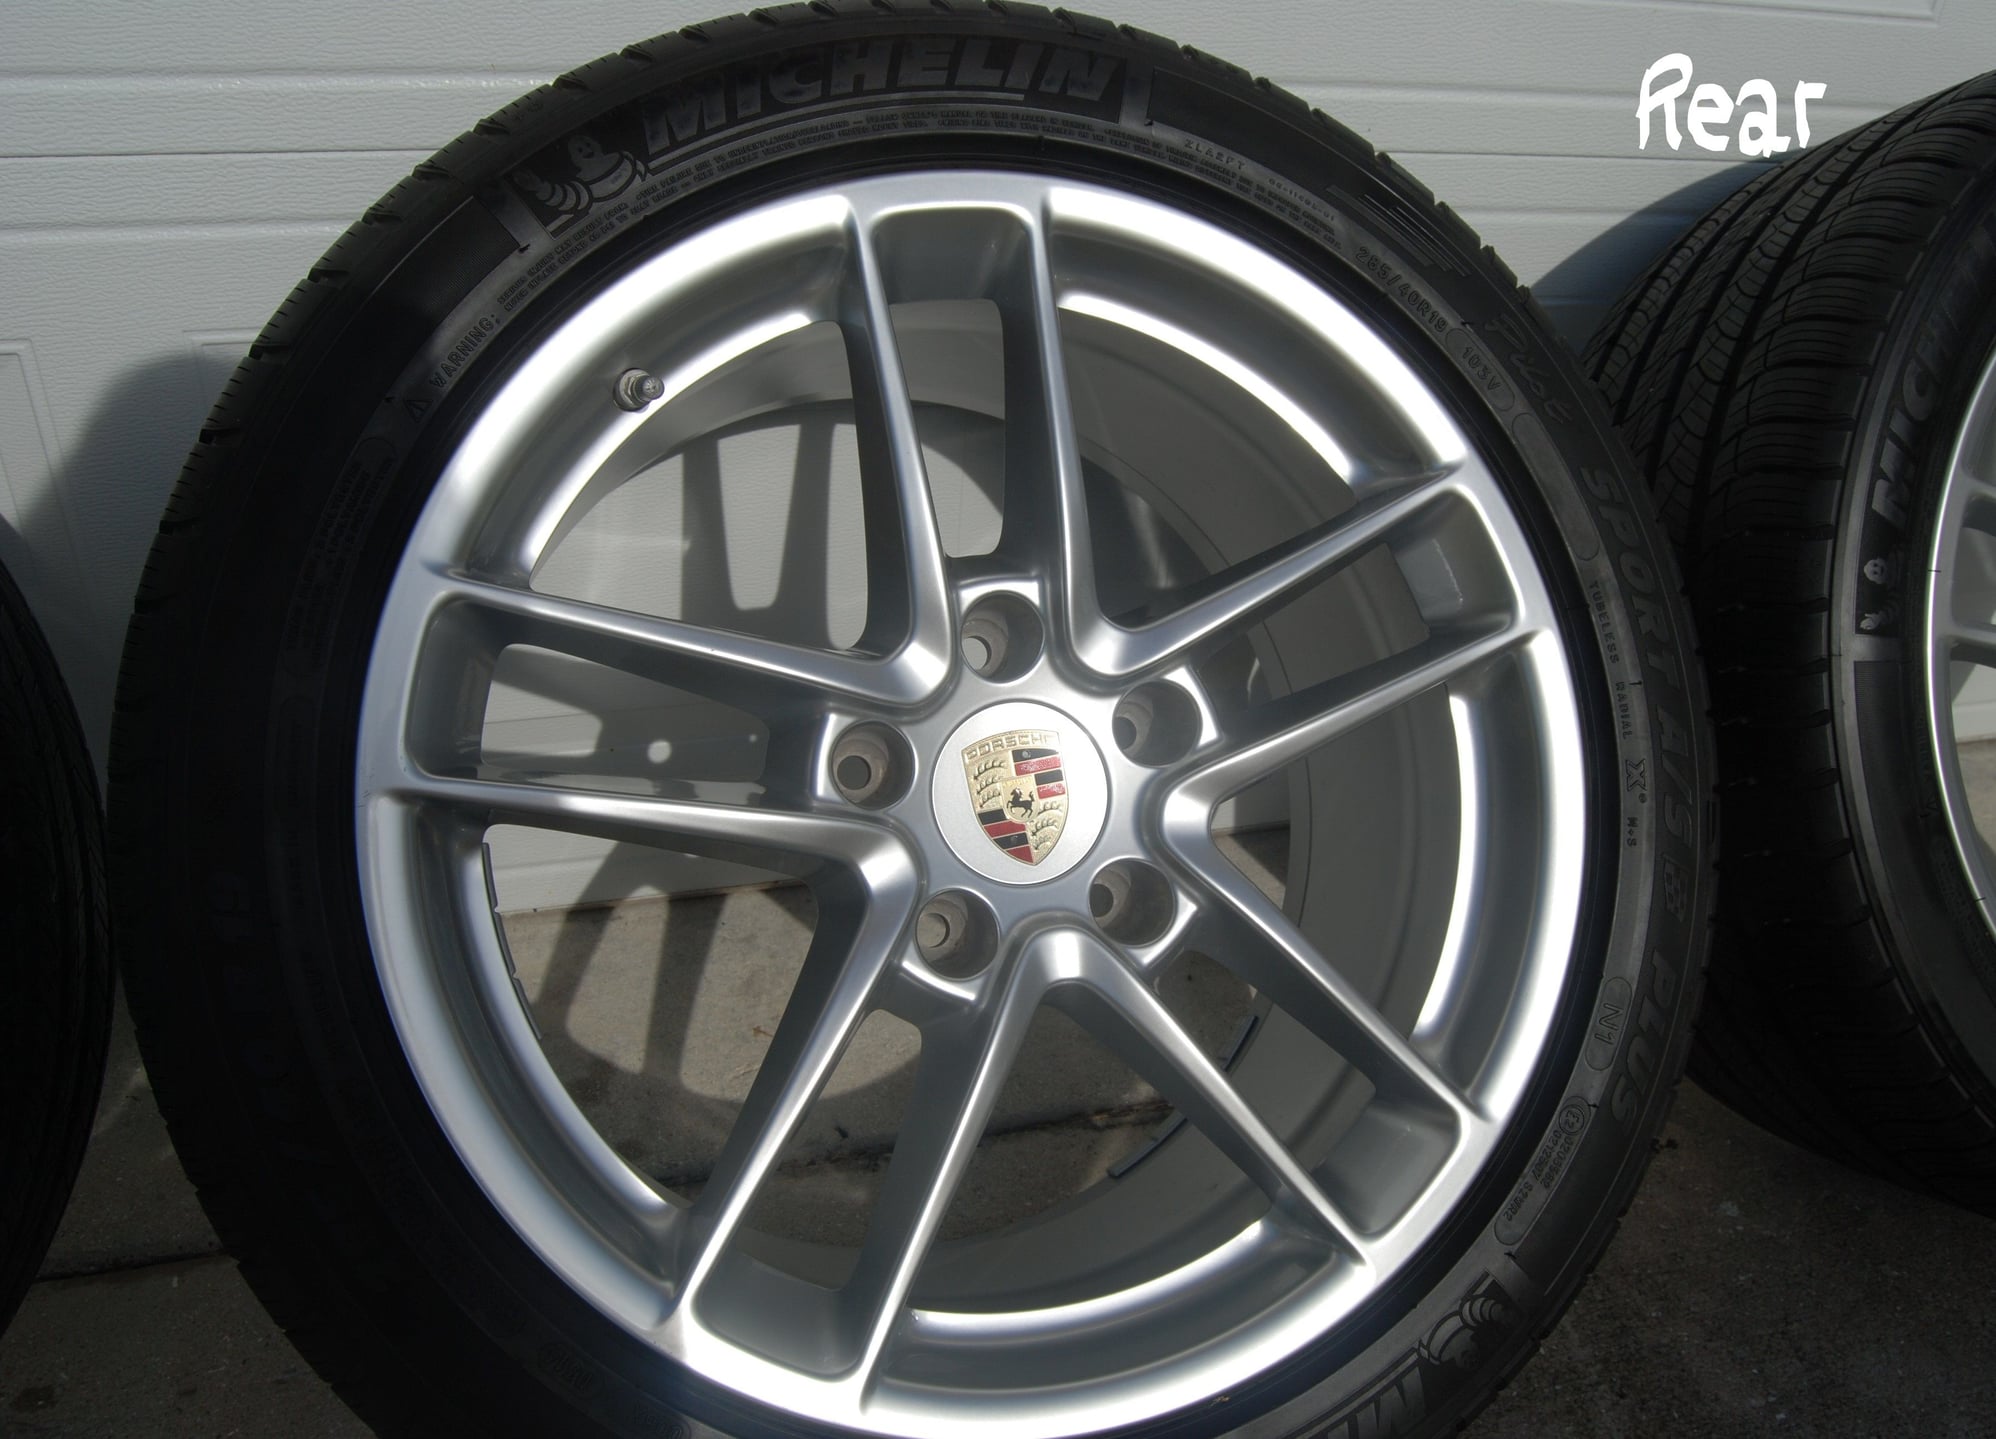 Wheels and Tires/Axles - PANAMERA Wheels/Tires/TPM/ Center Caps Like new - Used - 2014 to 2016 Porsche Panamera - 2009 to 2016 Porsche Panamera - Naples, FL 34109, United States